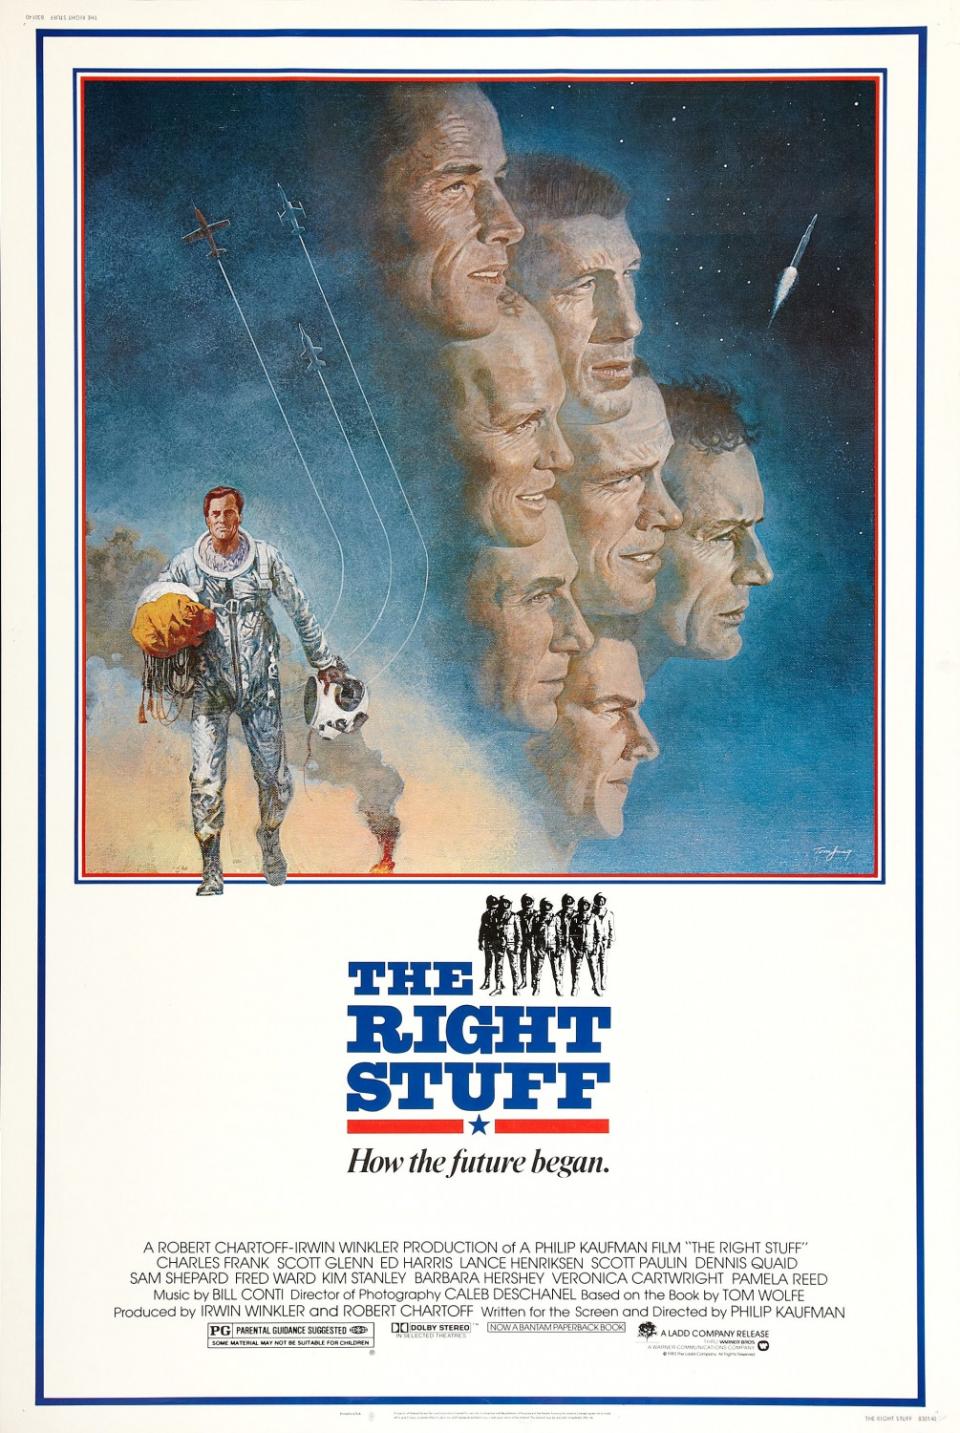 a movie poster depicting several astronauts in space suits